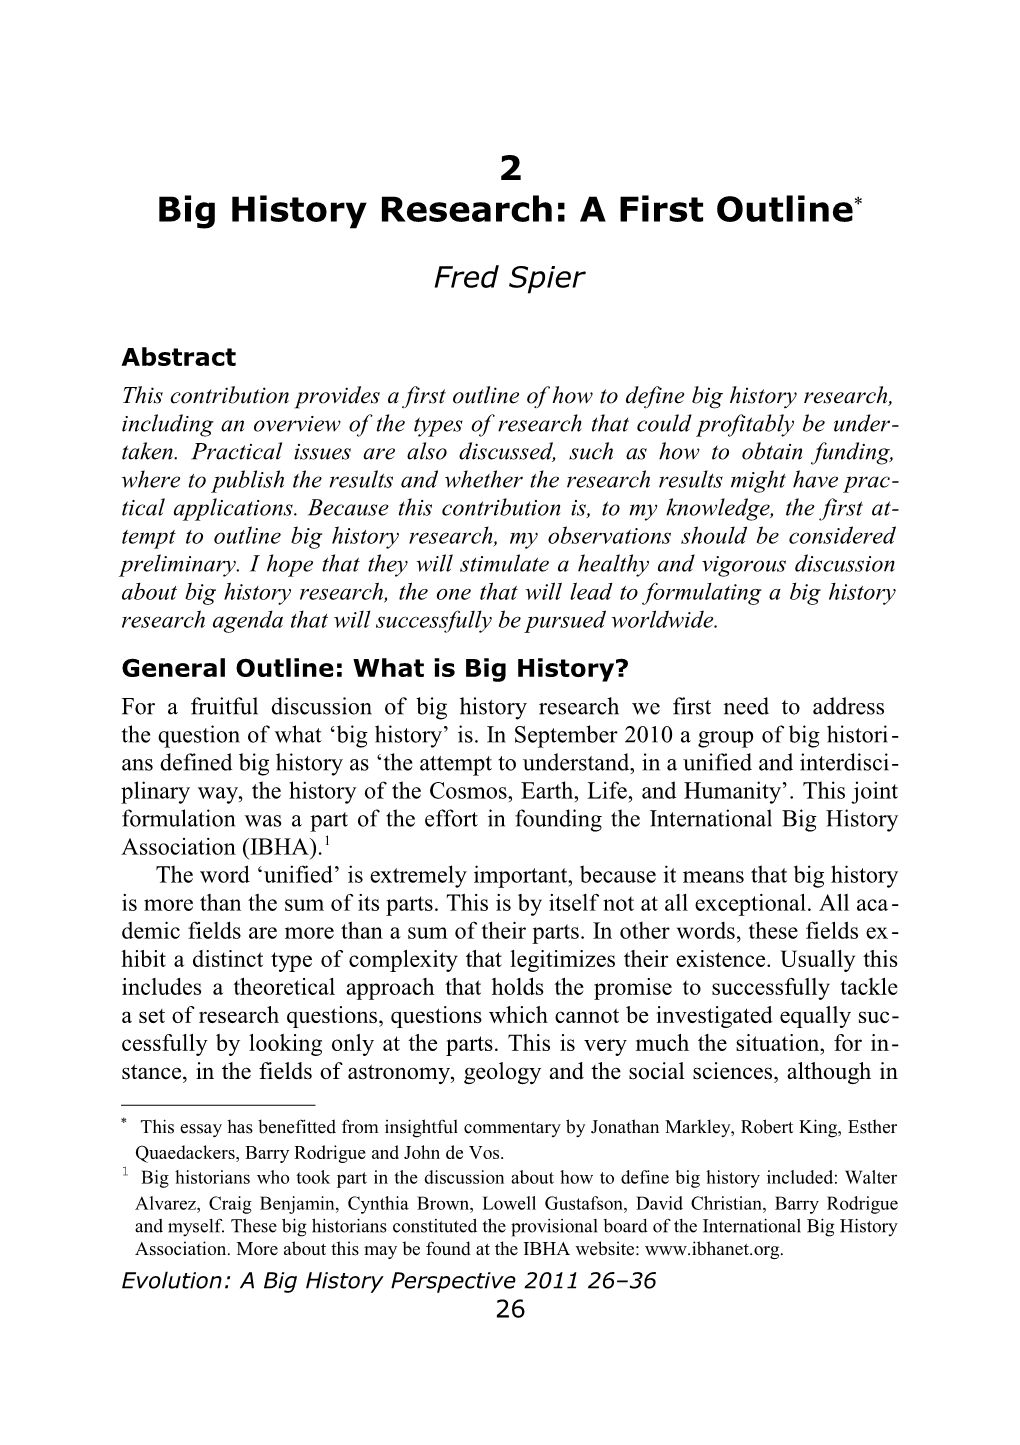 Big History Research: a First Outline